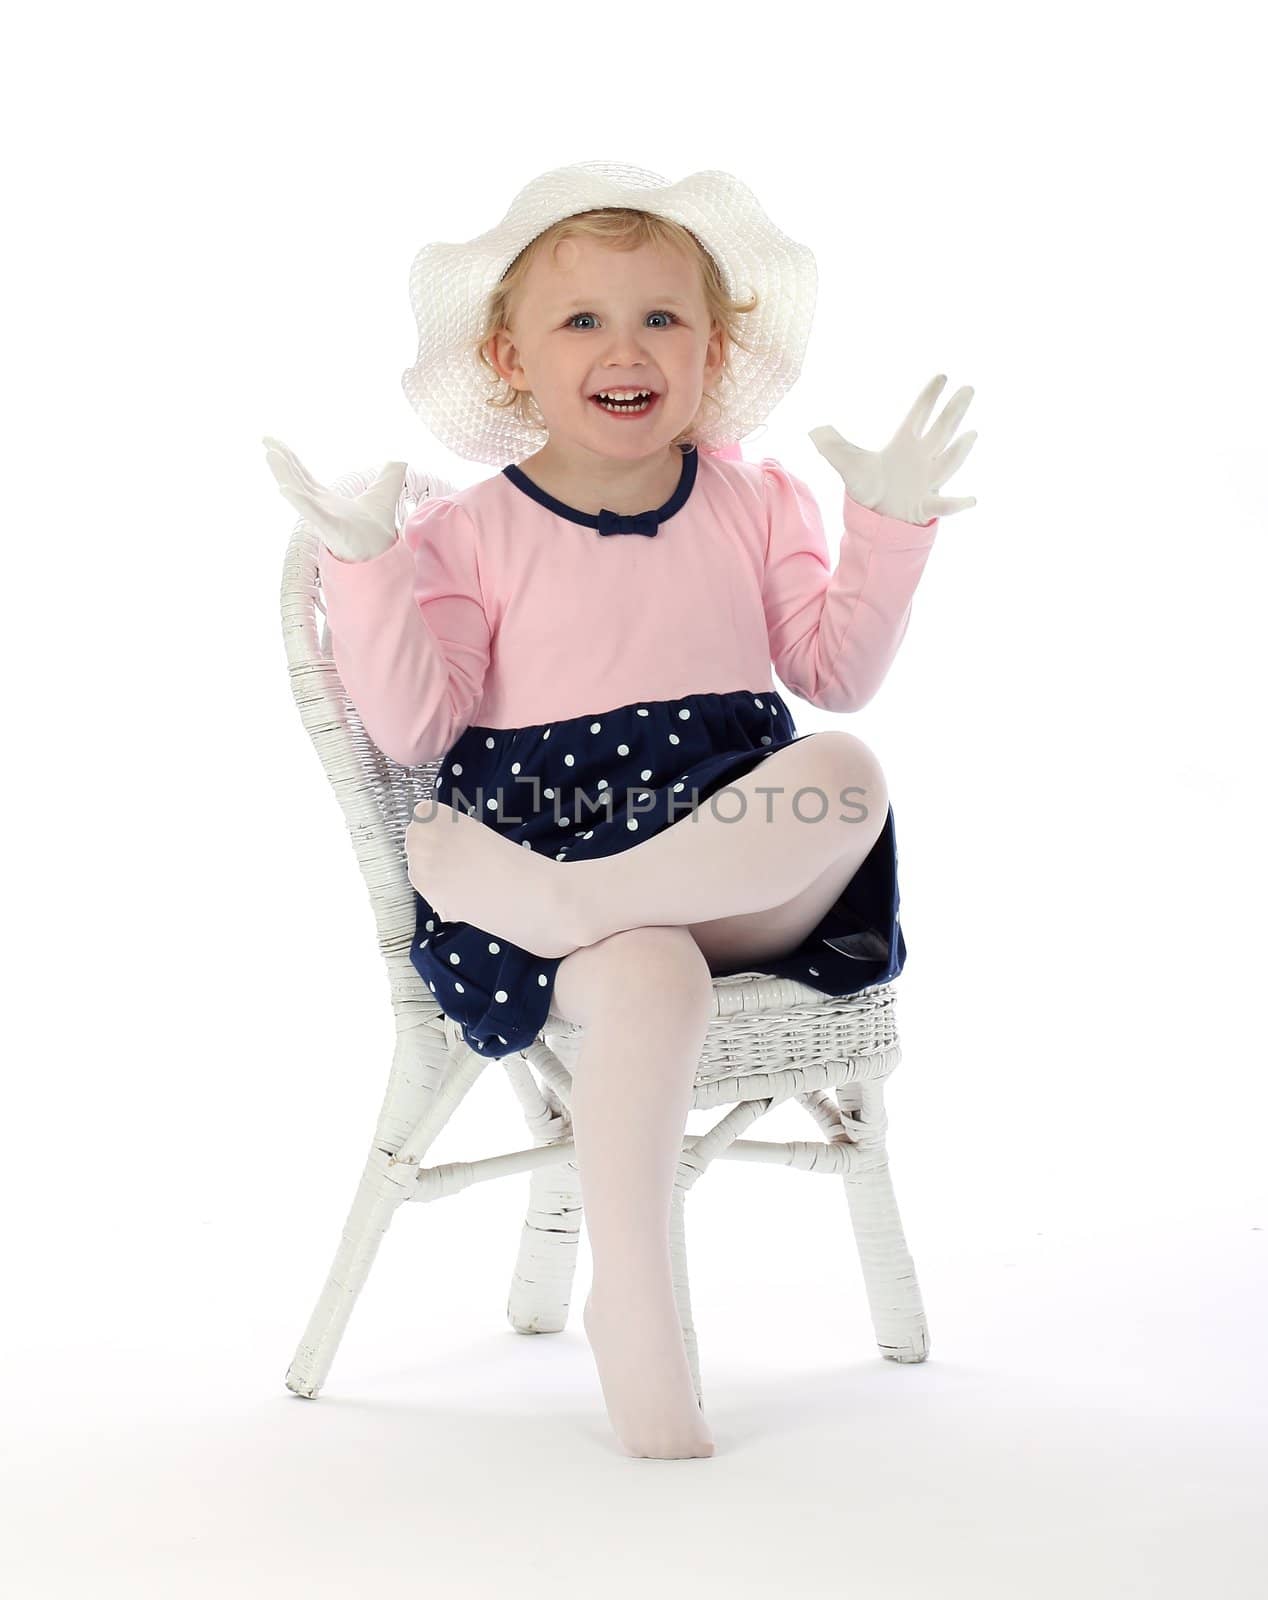 A small girl is happy about a secret surprise on a white background